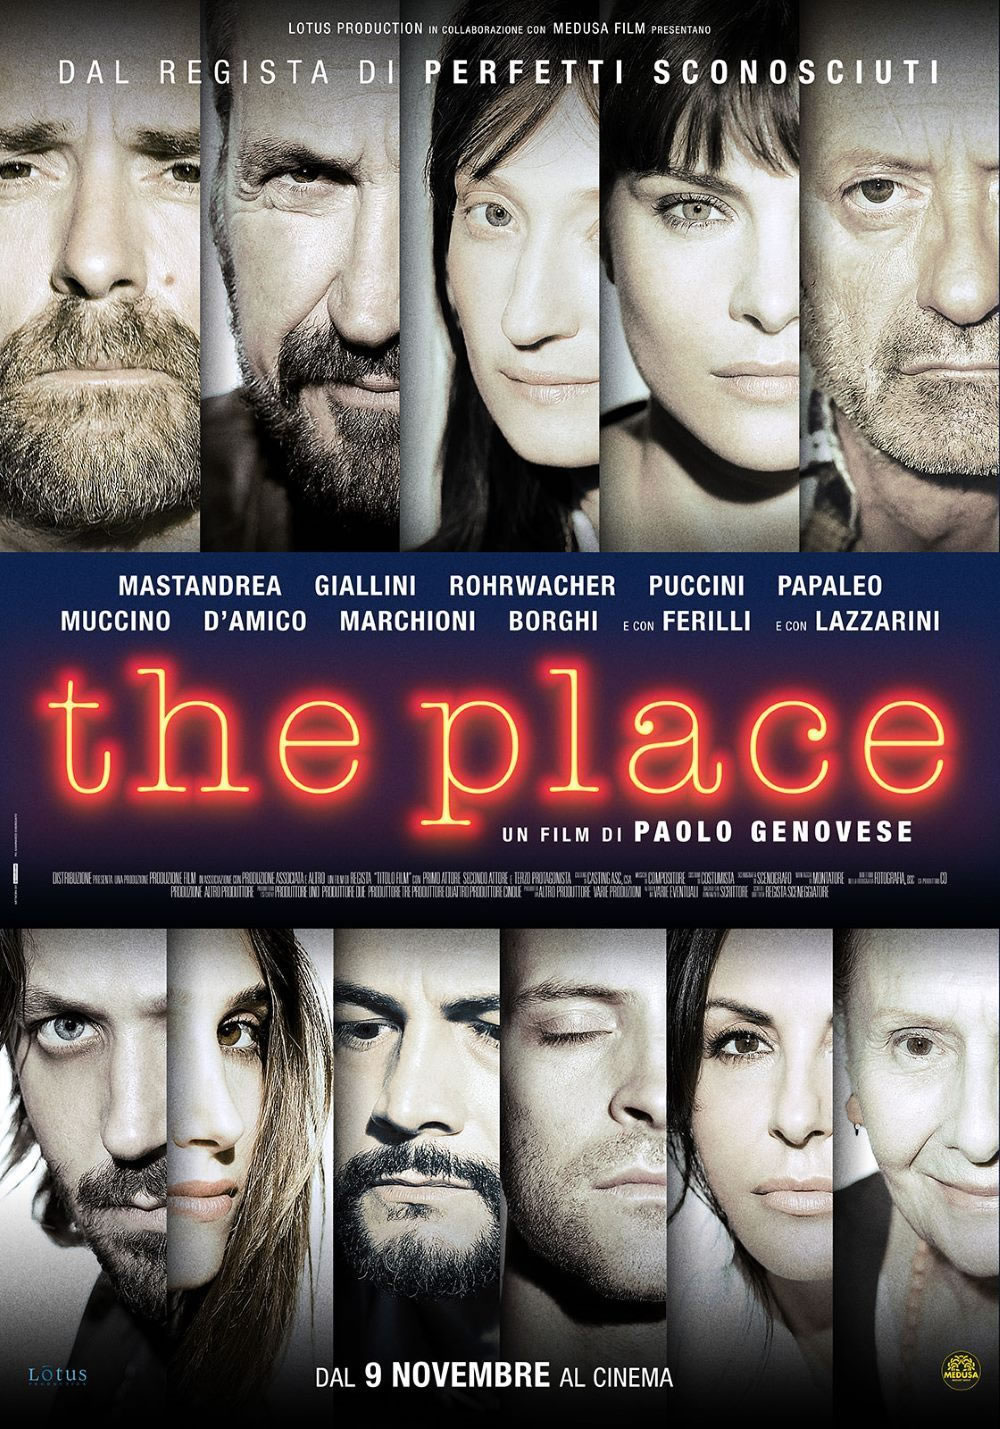 The place - Film 2017